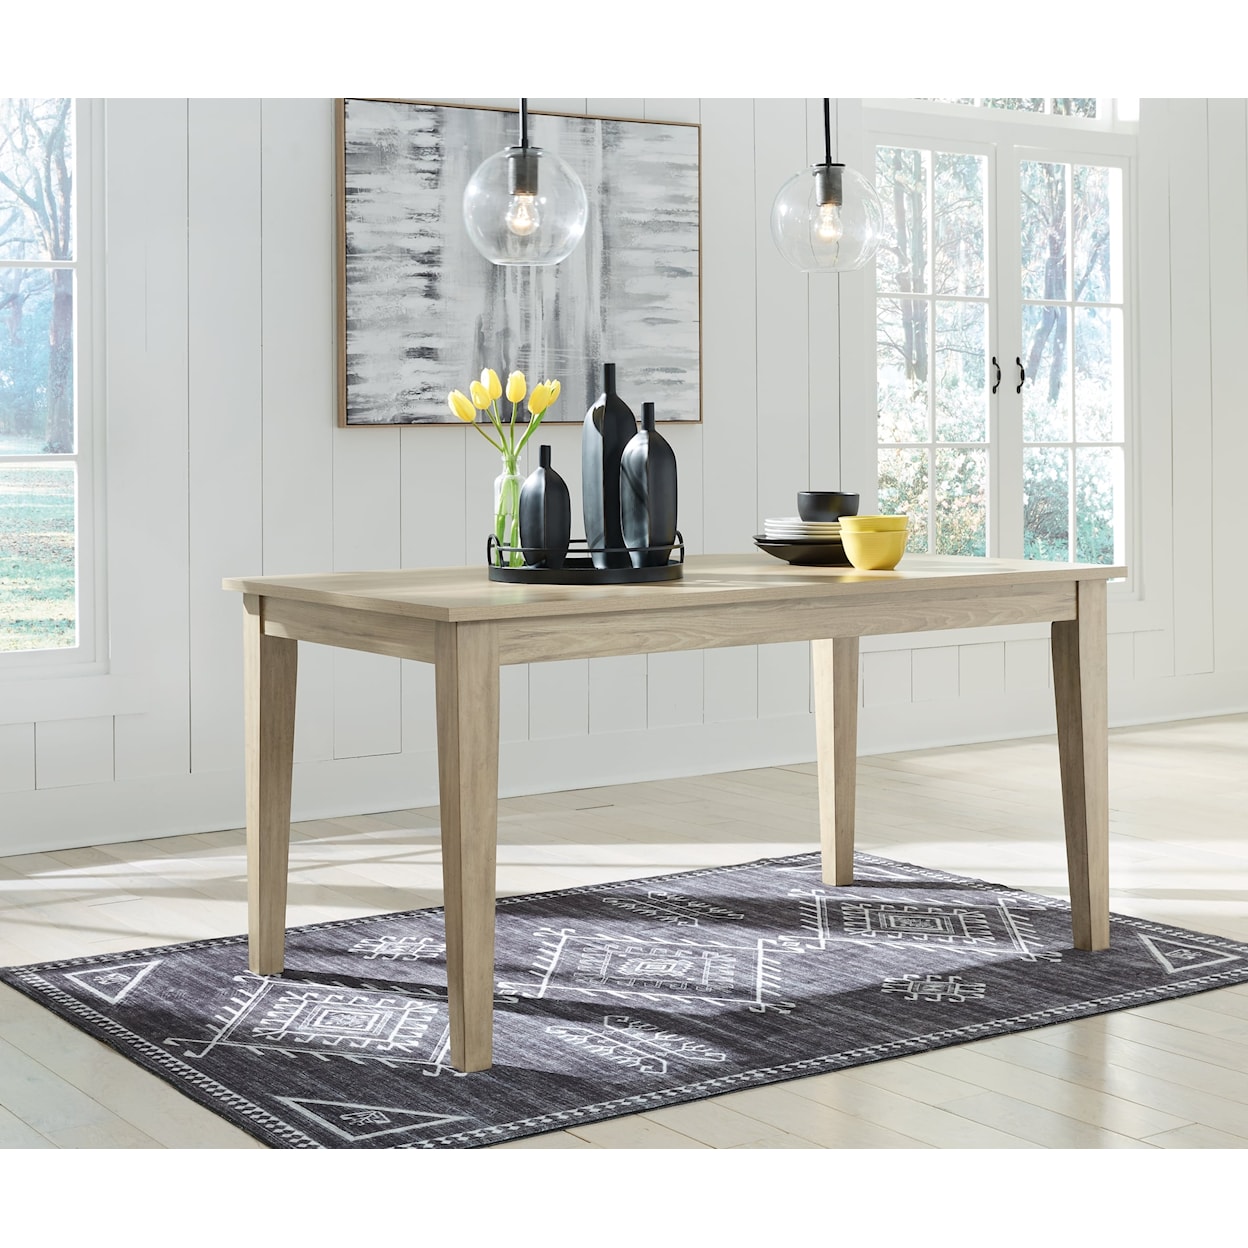 Signature Design by Ashley Gleanville 5-Piece Dining Set